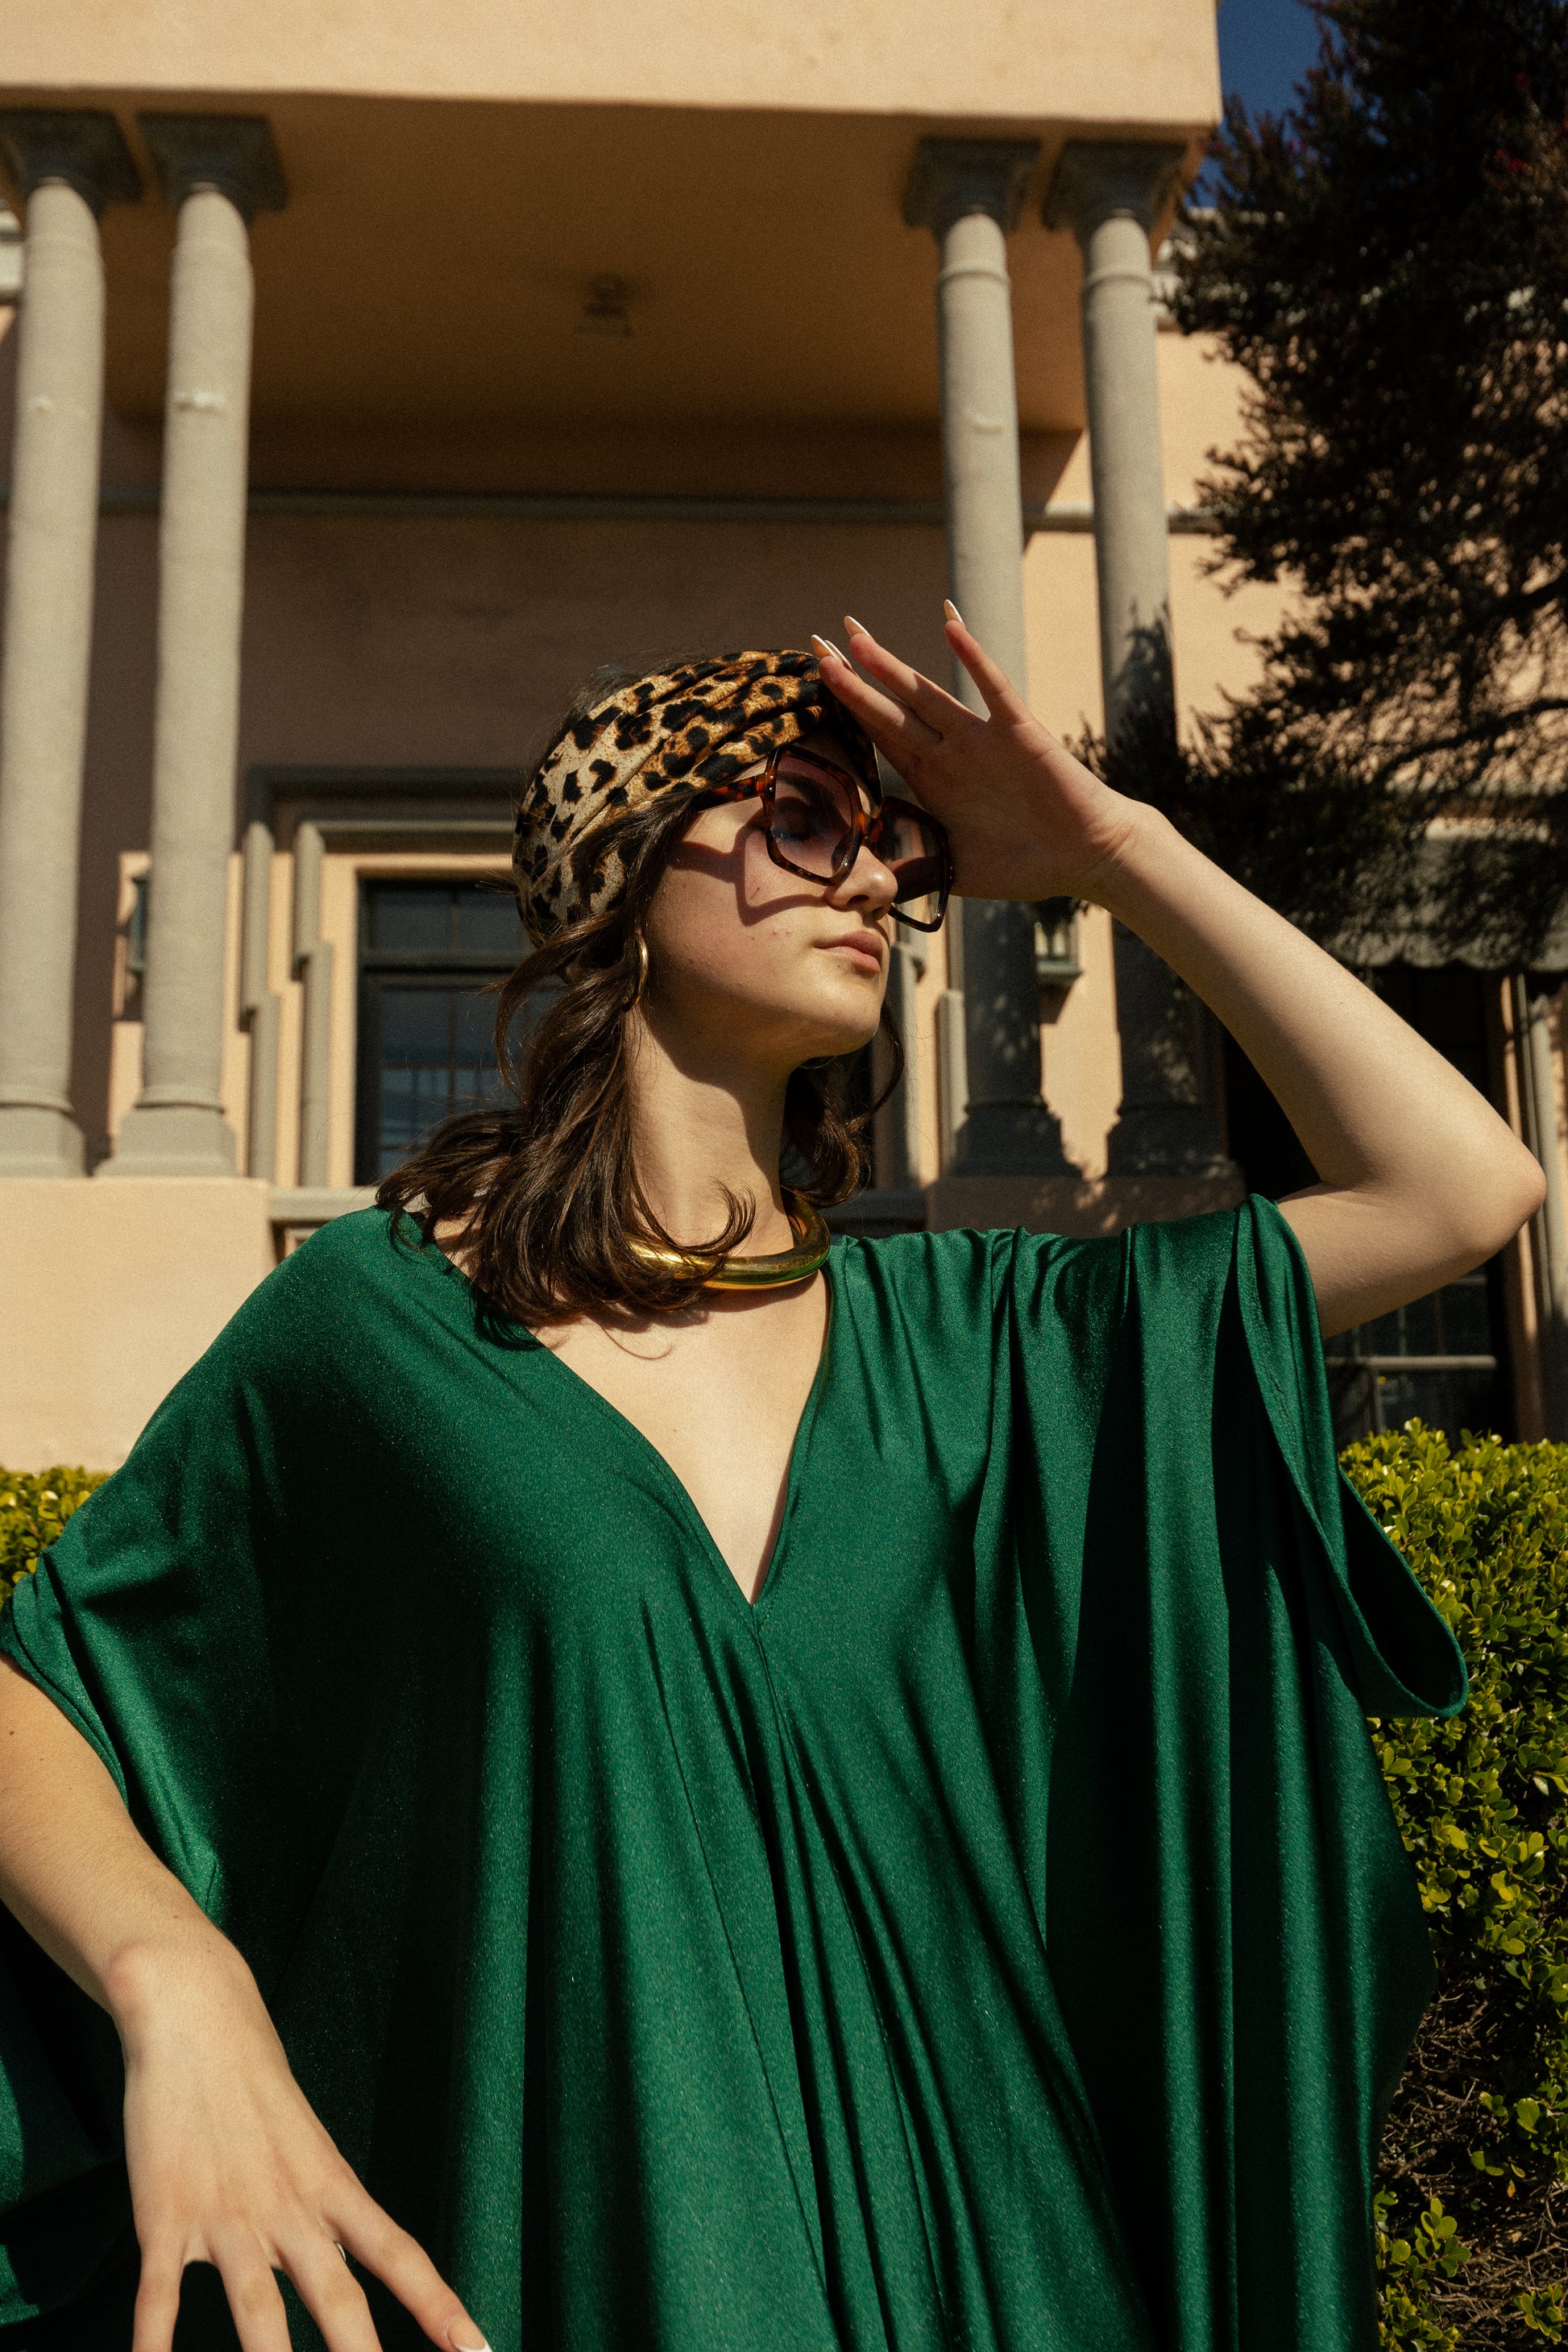 Elegant emerald green caftan made from jersey. Features a v-neck, batwing sleeves, and ankle hem.